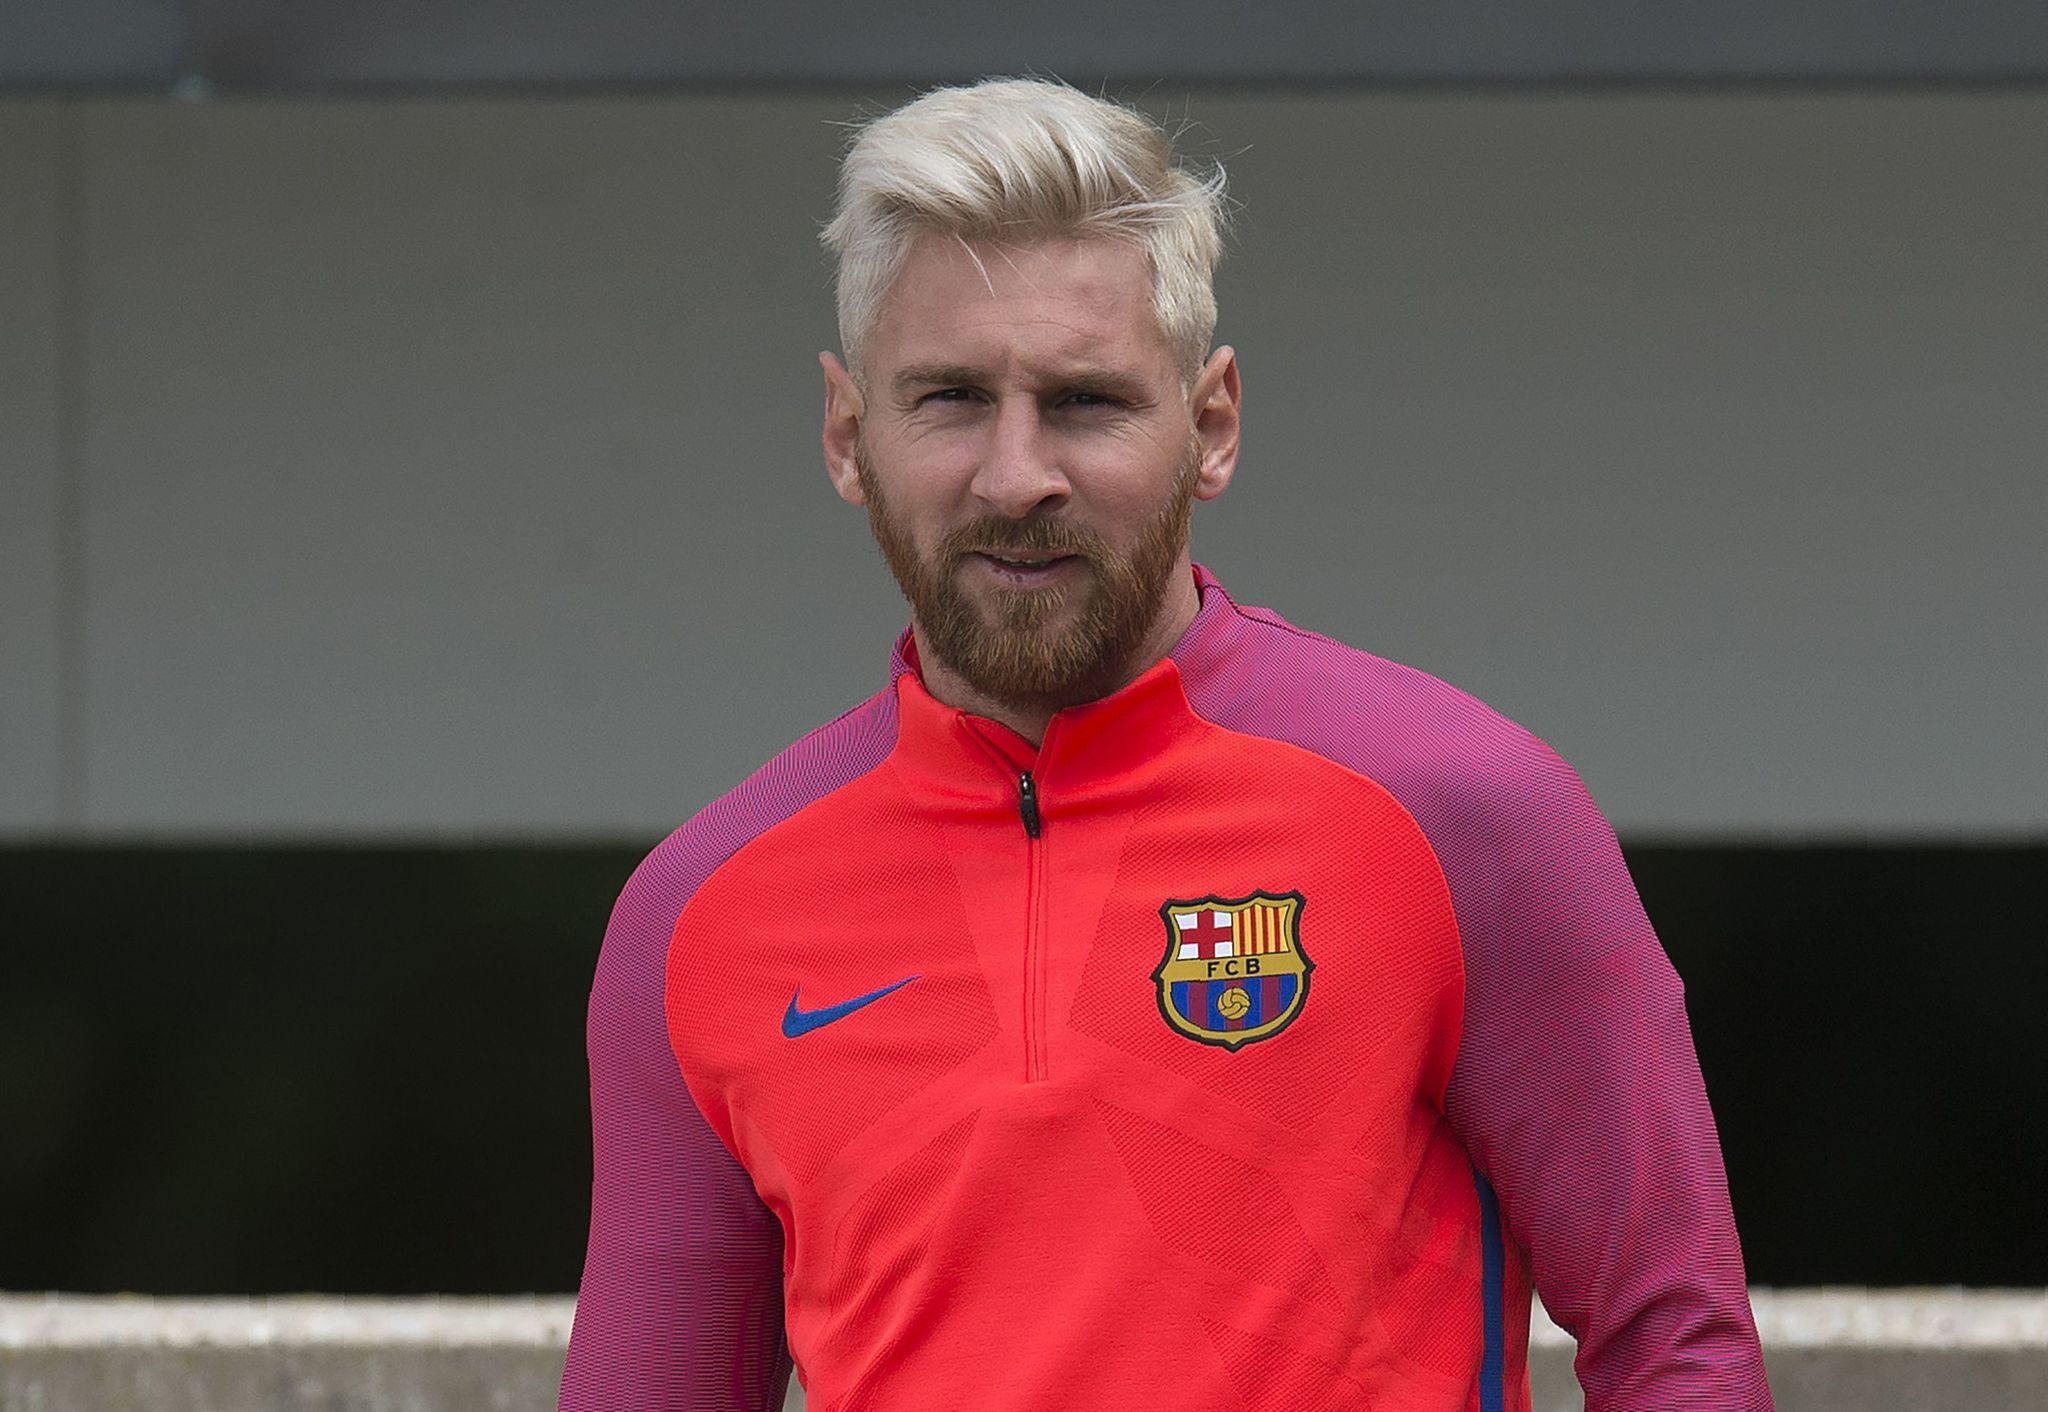 With new blond look, Lionel Messi's head not feet creating a stir